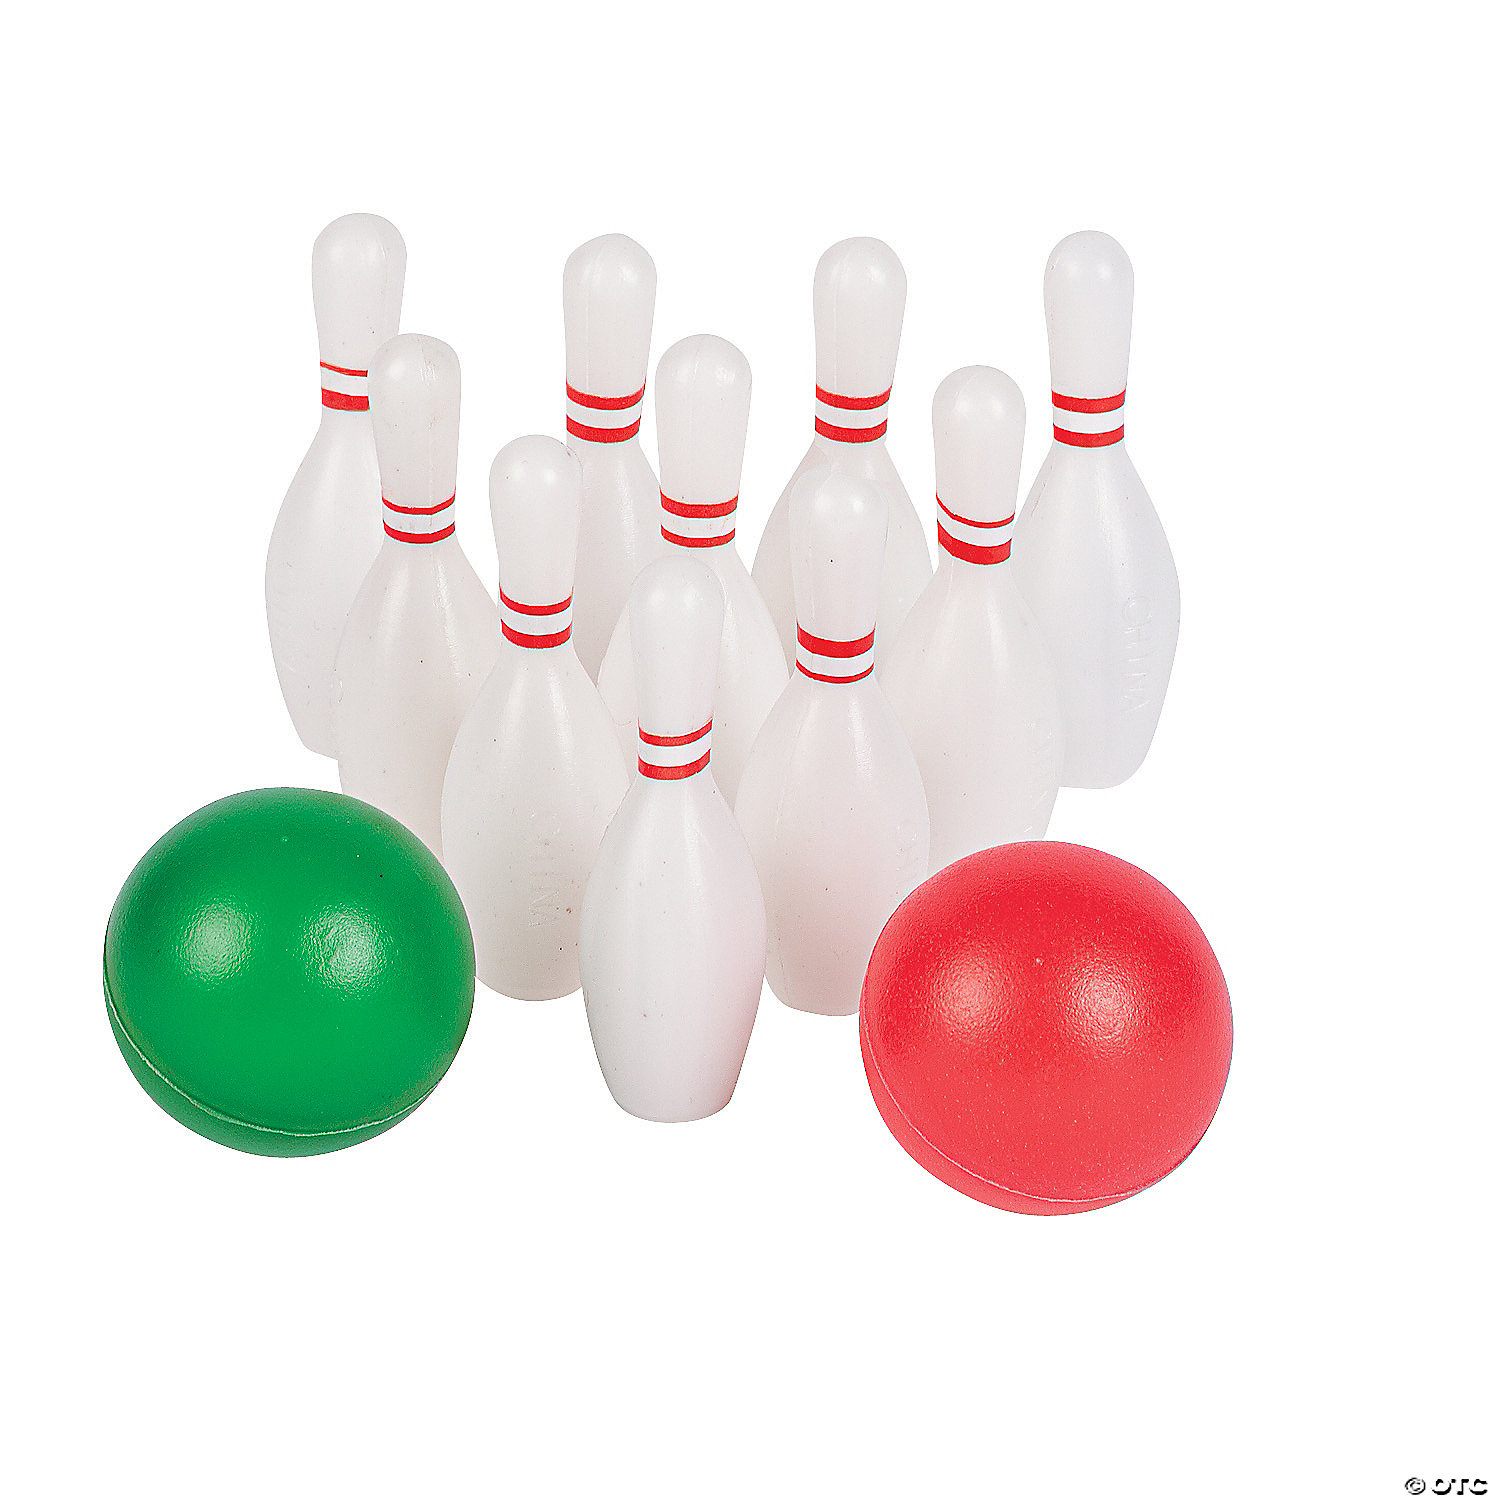 Mini Desktop Bowling Set Game Home or Office New 7 Piece Fun Table Desk Game 